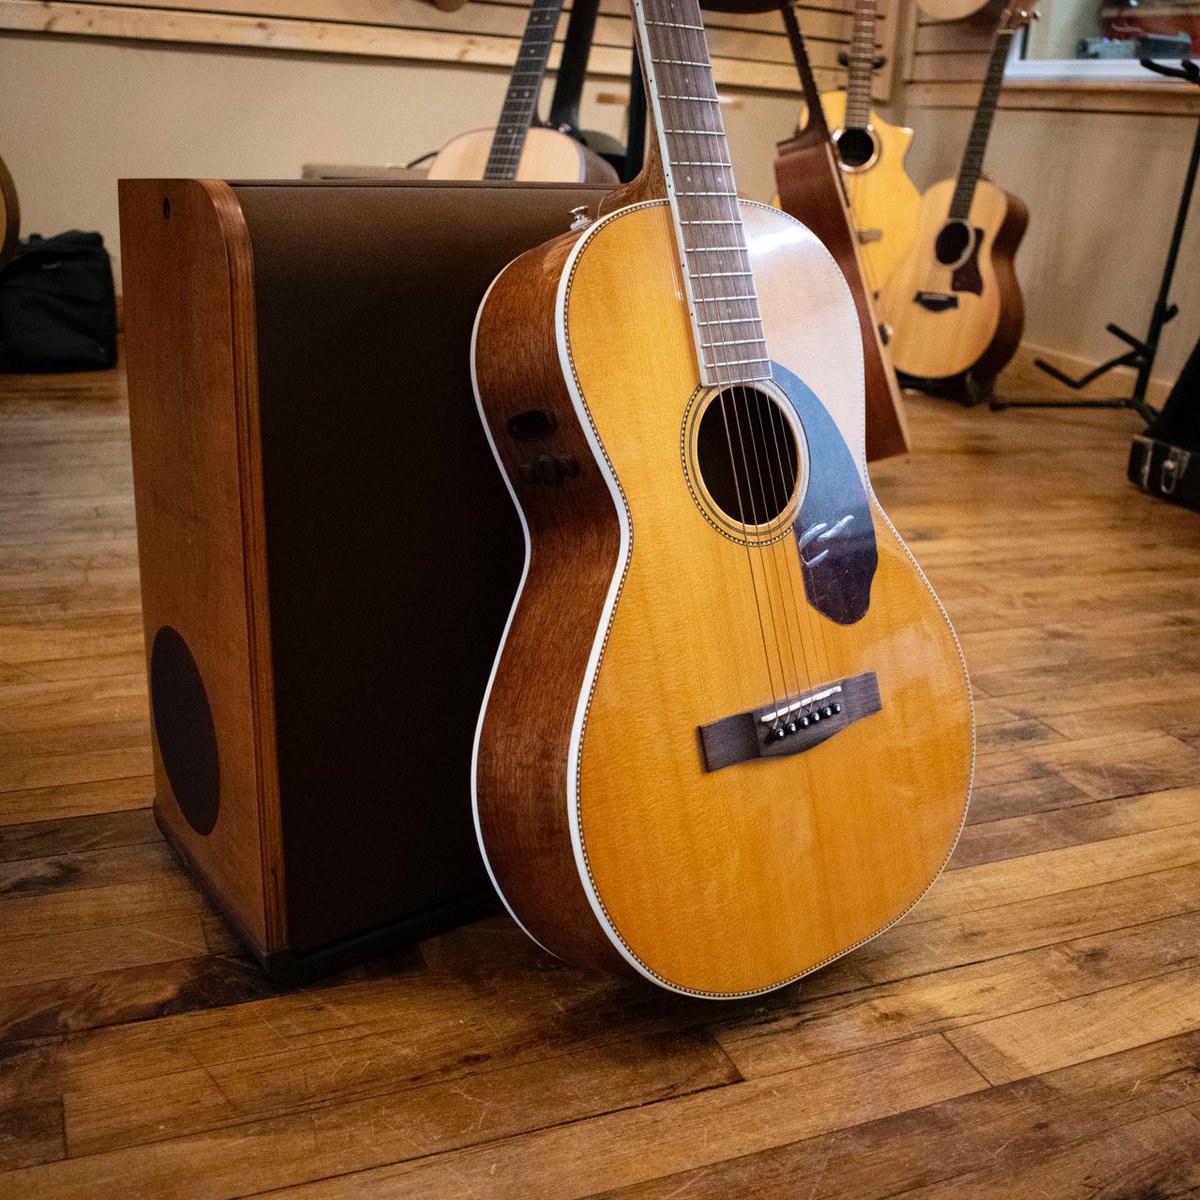 Fender’s Paramount series are full solid wood acoustic guitars, designed in the US. Paying homage to the design elements of classic 60’s models, such as the checkerboard purfling and rosette. 
.
.
.
.
#acoustictone #cowboyguitar #fenderparamount #twintownguitars #ttg #loudnlocal